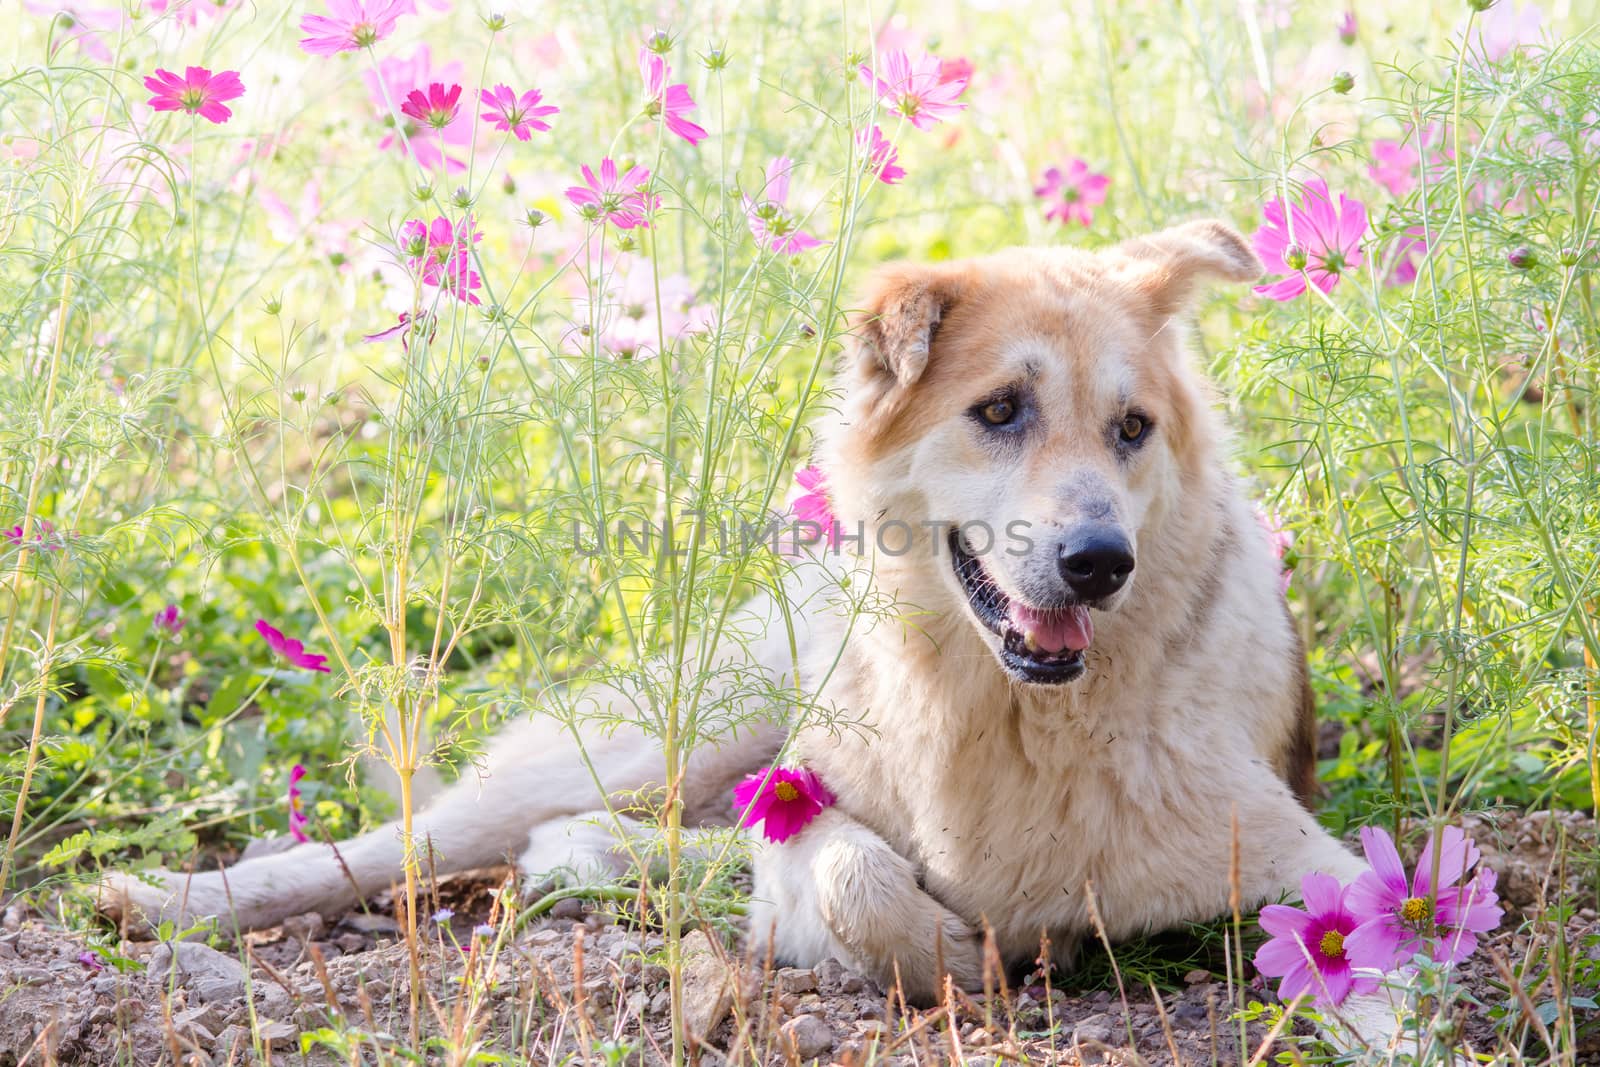 Blurry dog and flower for background 